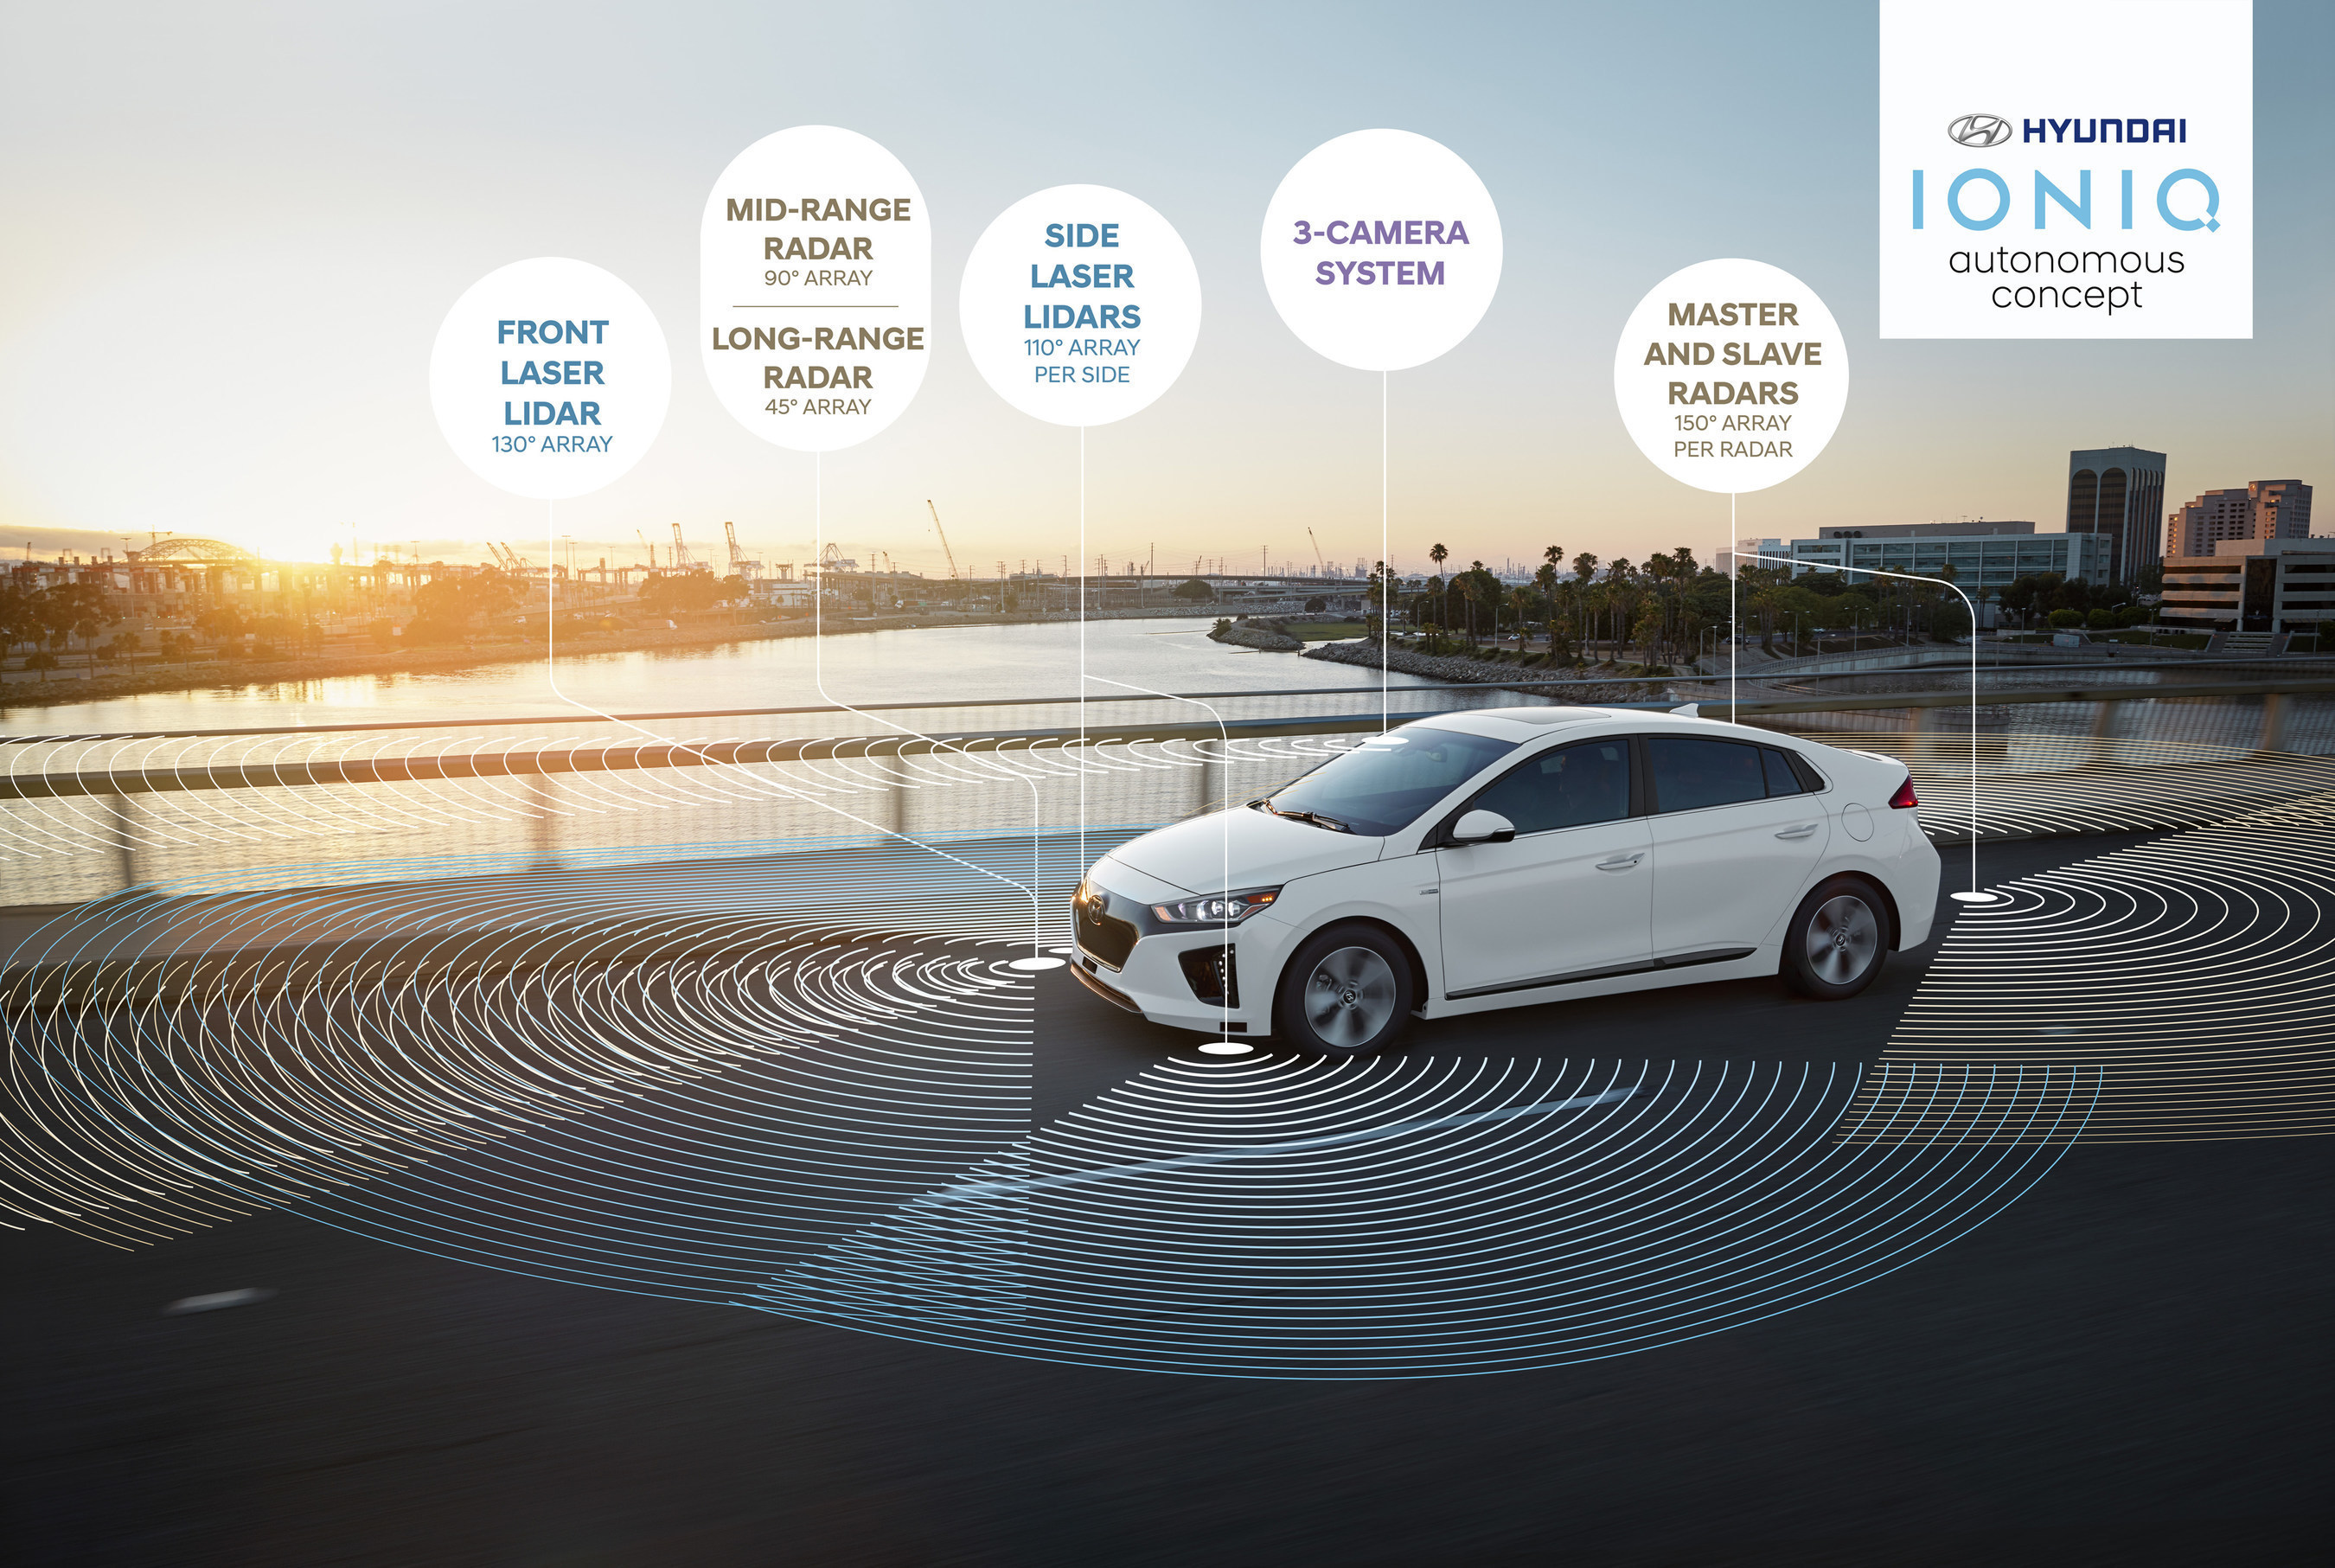 Los Angeles, Nov. 16, 2016 - Hyundai announced the introduction of the Autonomous IONIQ concept during its press conference at Automobility LA (Los Angeles Auto Show). With a sleek design resembling the rest of the IONIQ lineup, the vehicle is one of the few self-driving cars in development to have a hidden LiDAR system in its front bumper instead of on the roof, enabling it to look like any other car on the road and not a high school science project.